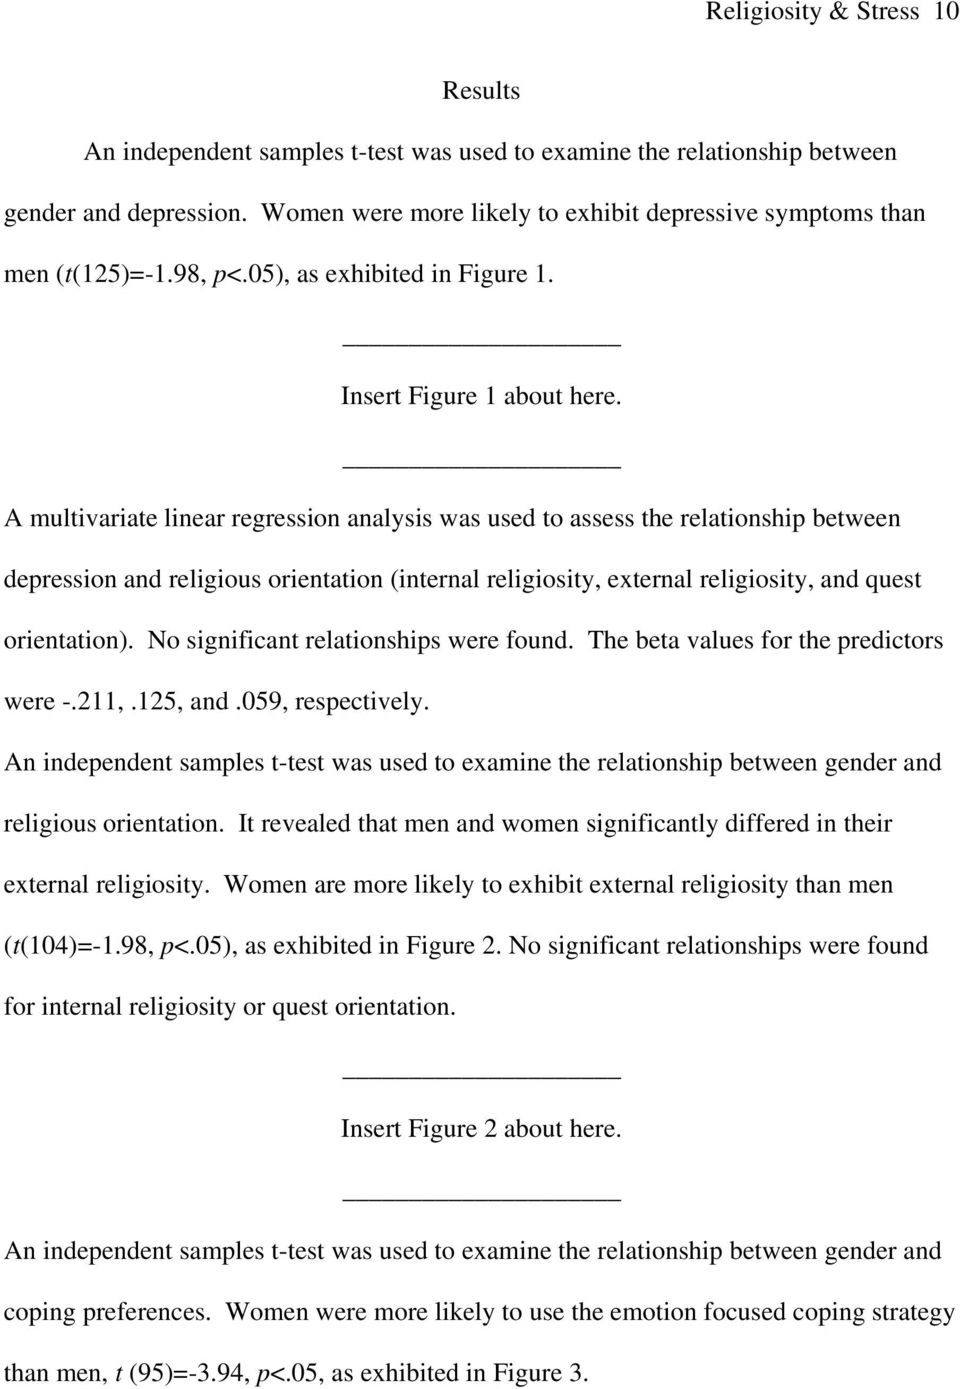 A multivariate linear regression analysis was used to assess the relationship between depression and religious orientation (internal religiosity, external religiosity, and quest orientation).